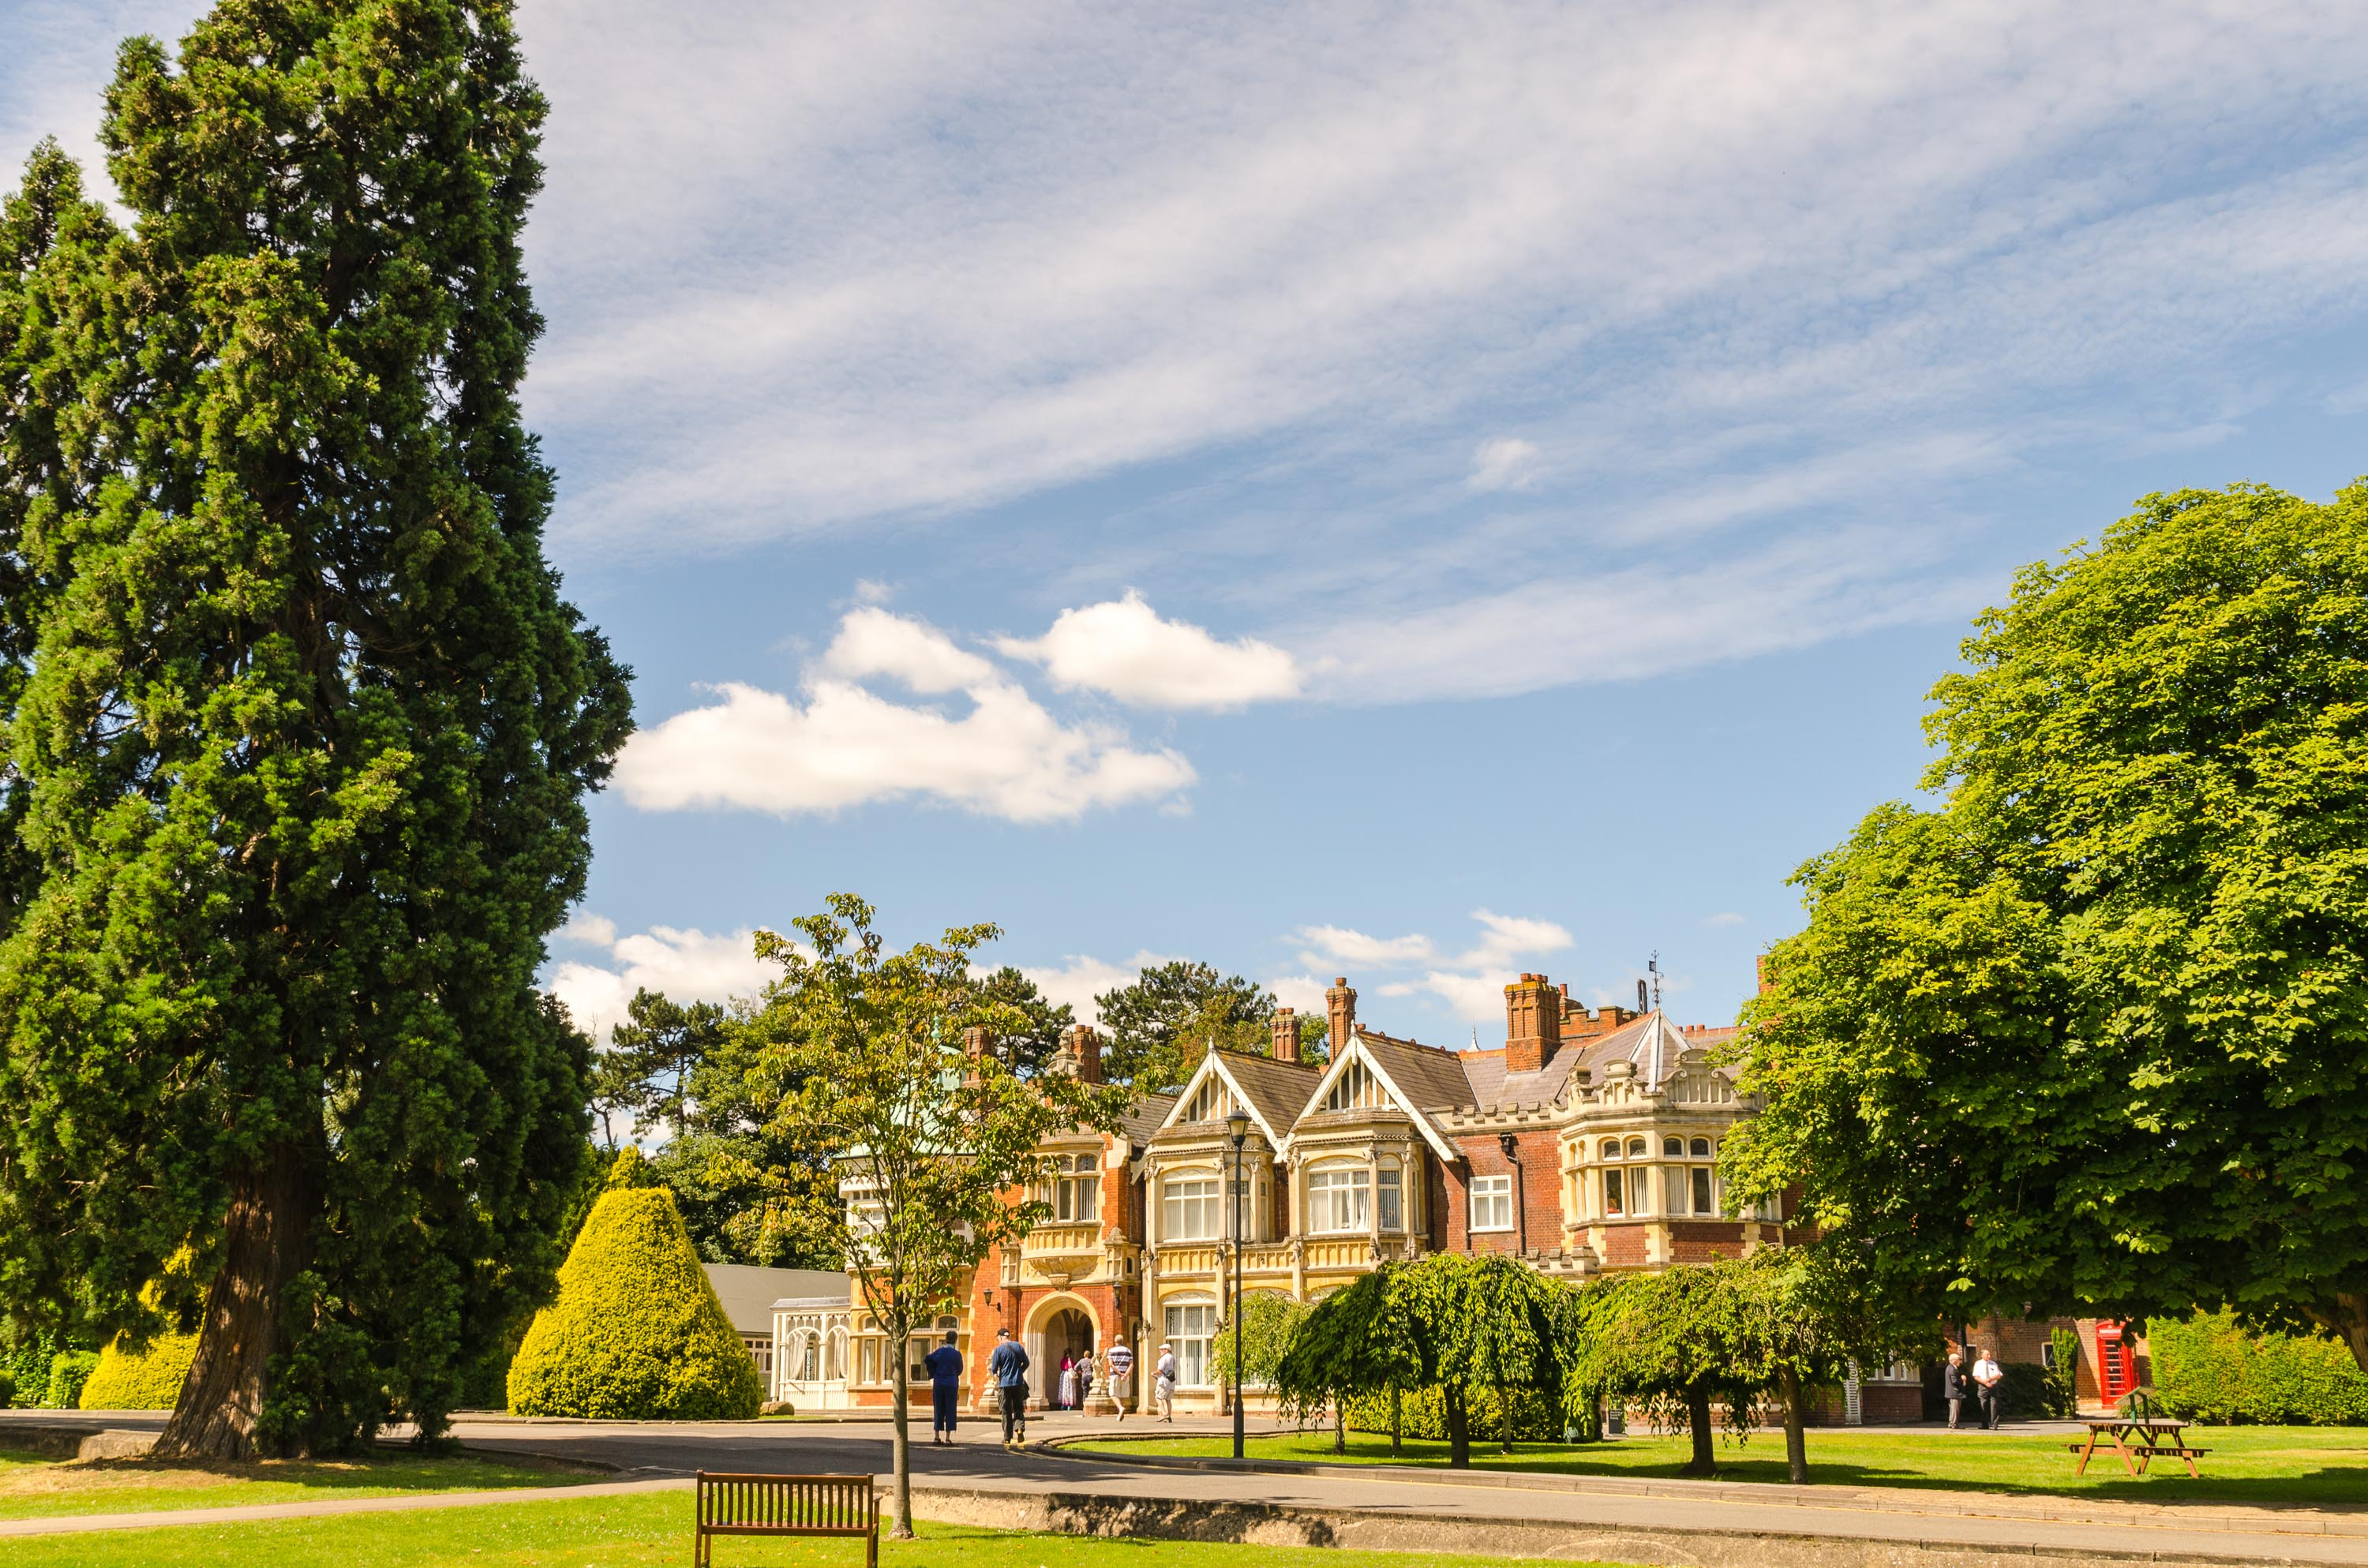 This is no coincidence! The first global AI security summit will be held at... Bletchley Park